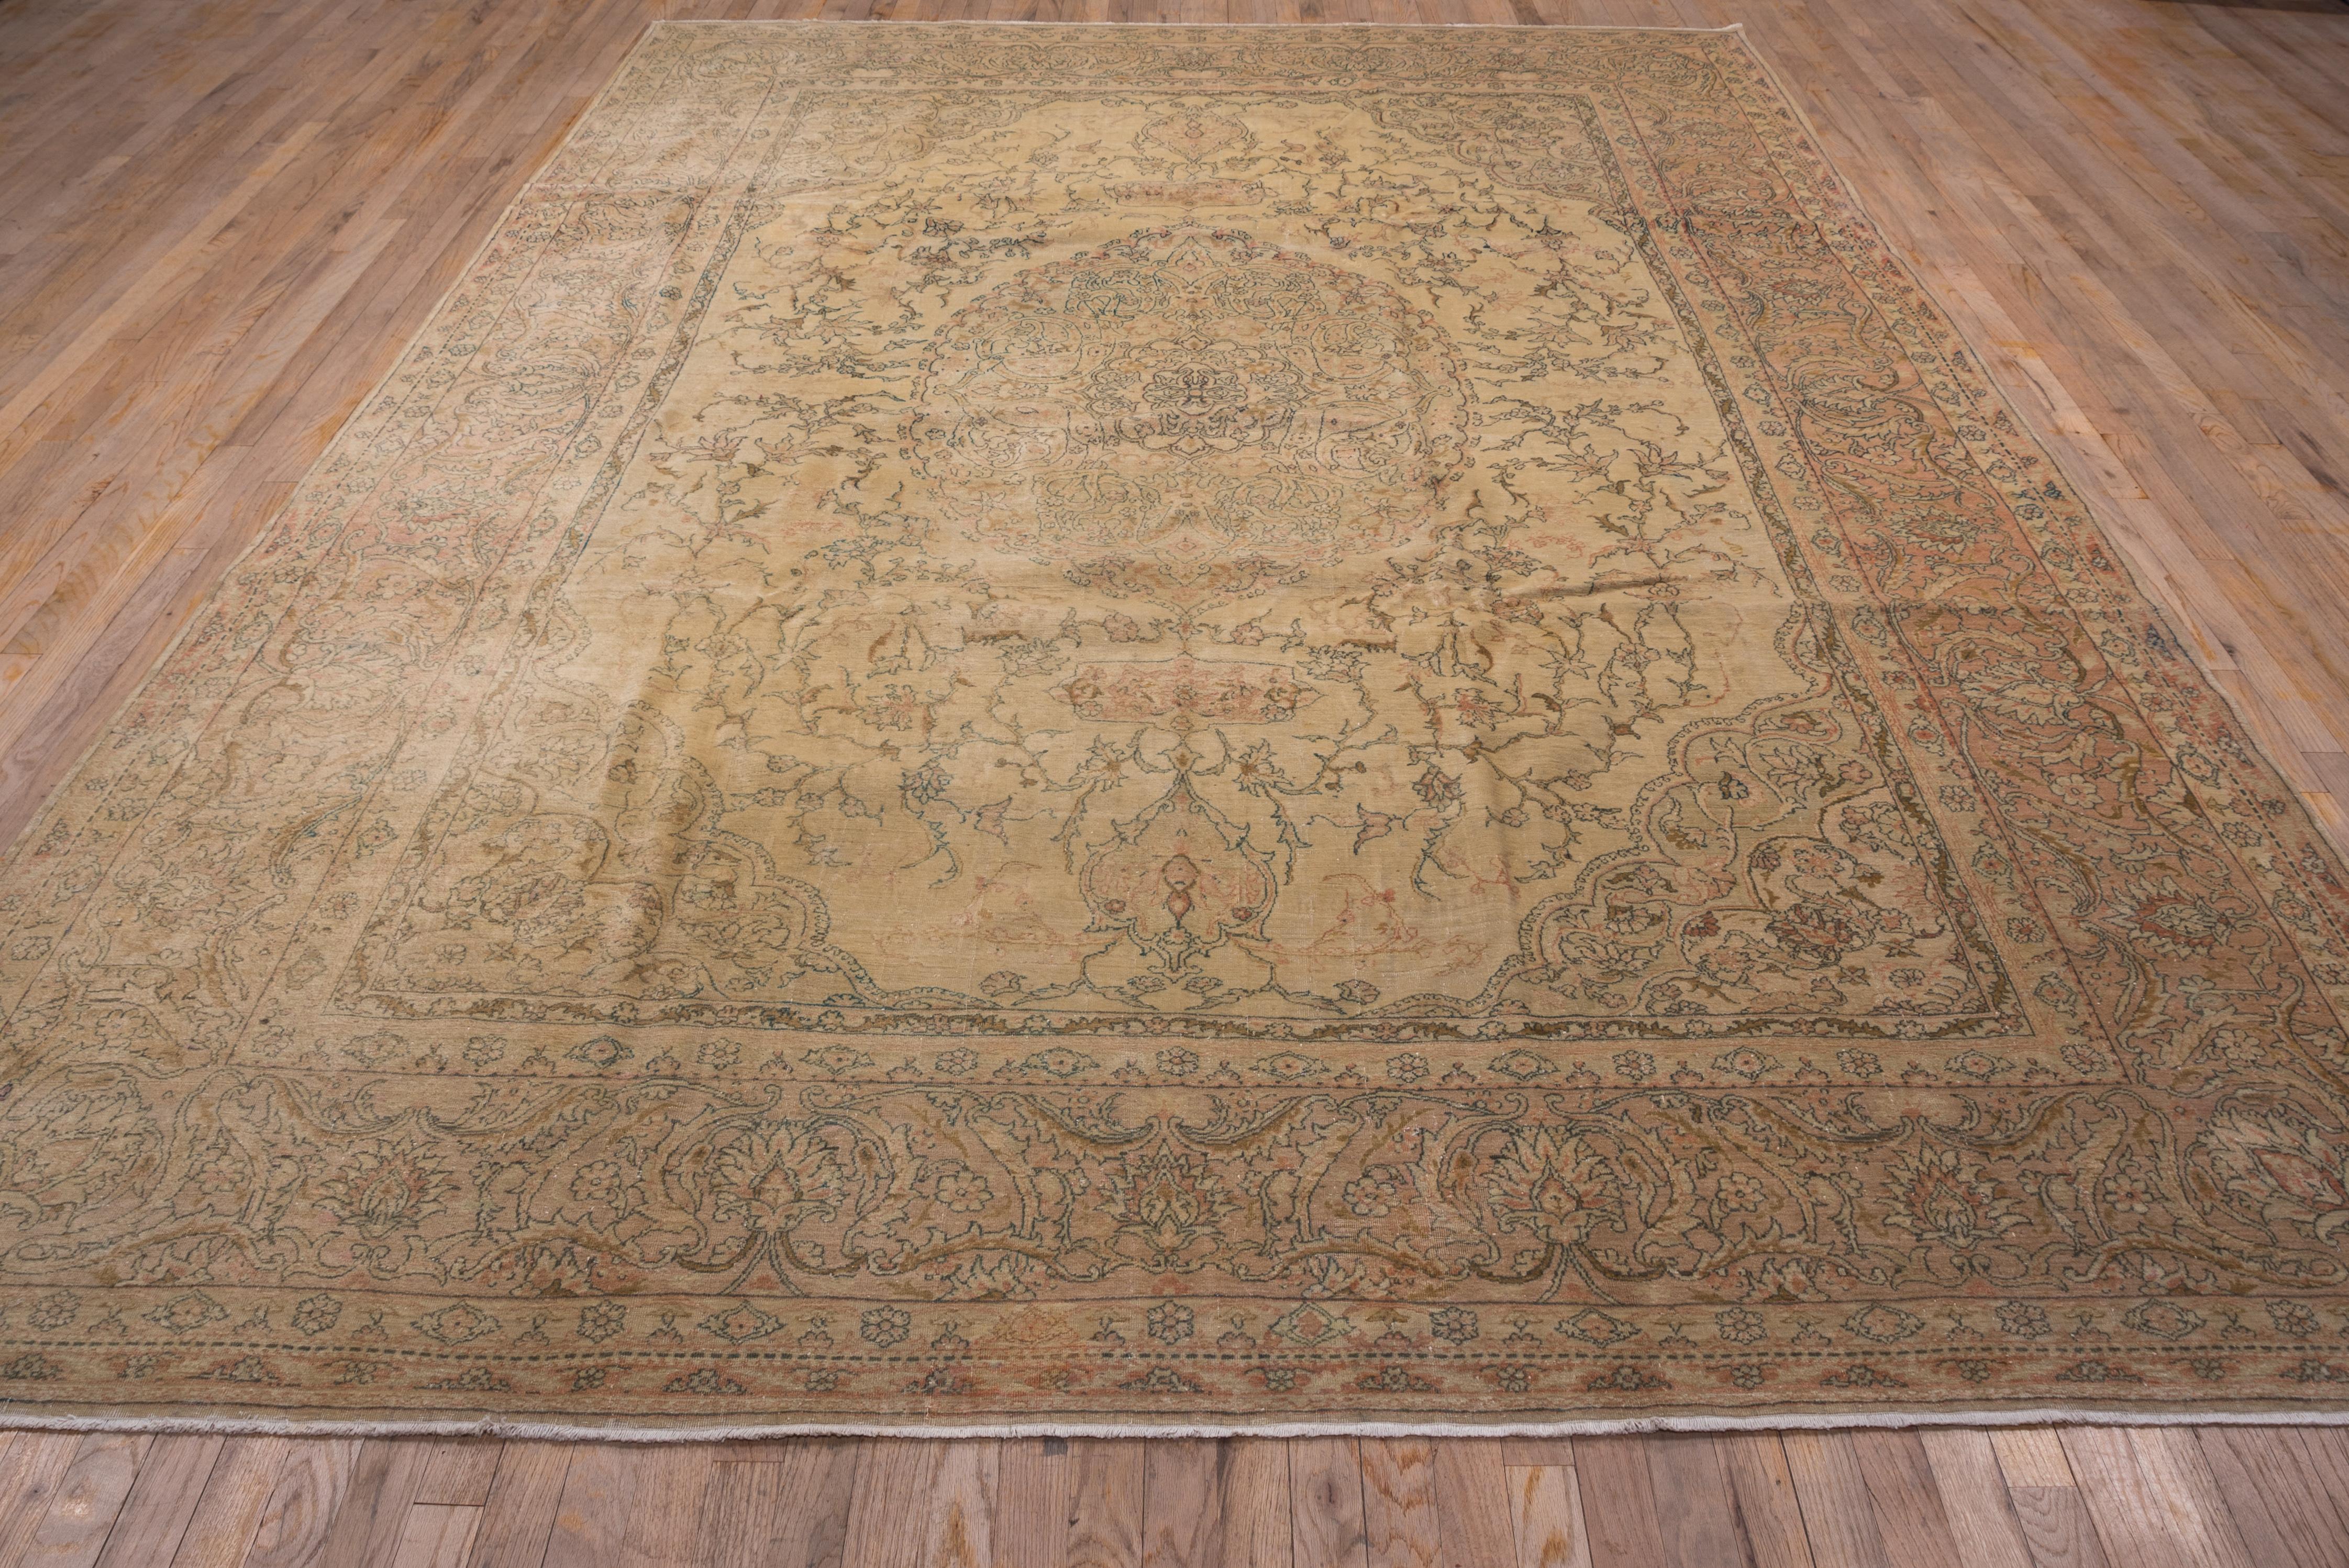 In the Tabriz style, with a sandy straw field supporting a closely scalloped oval ogival medallion and roughly en suite corners. Doubled pendants. Stems bend and break around the medallion in the field. Ale buff-beige border with vigorous barbed